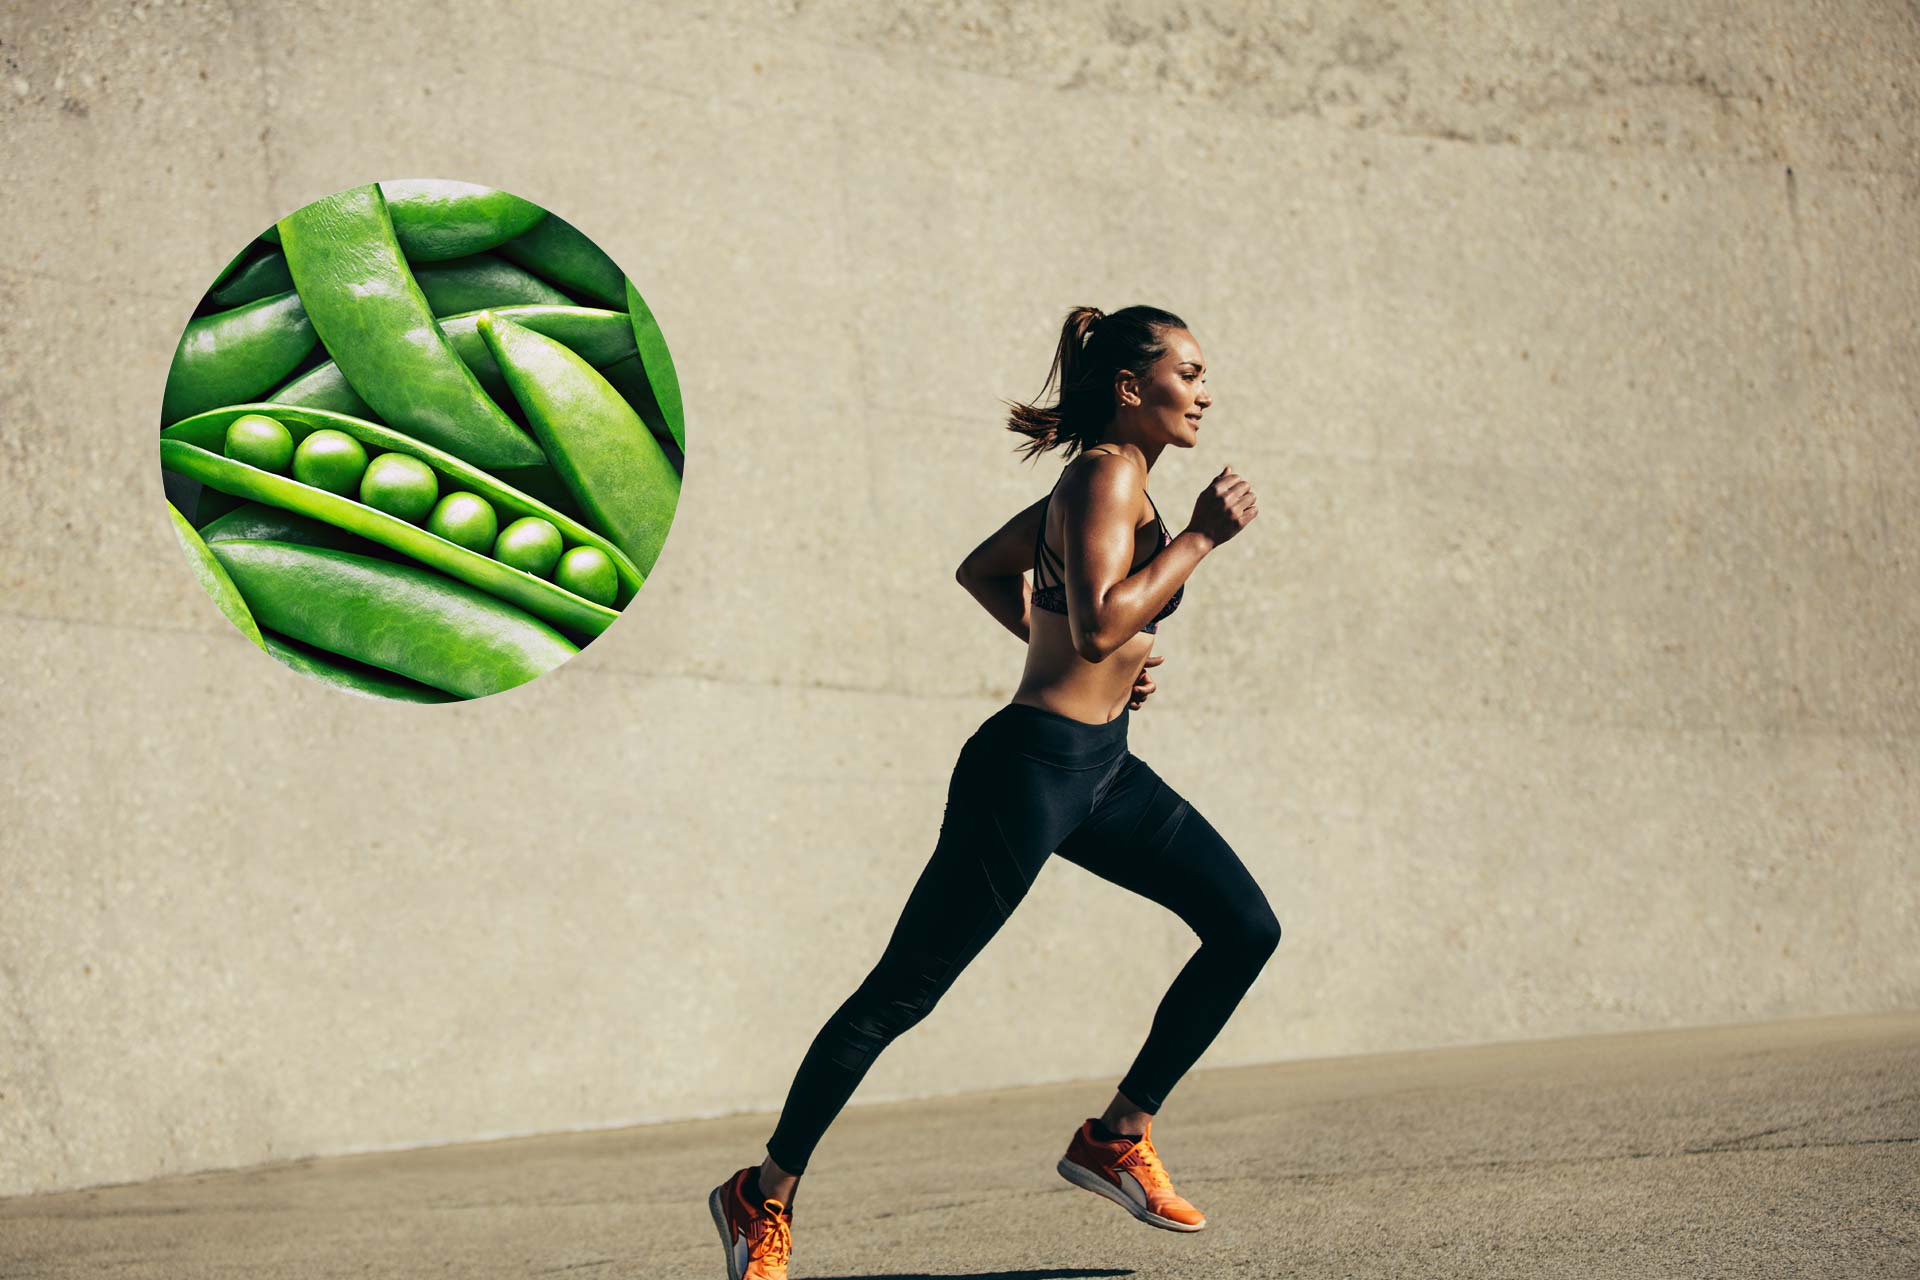 A woman running with an inset image of pea pods